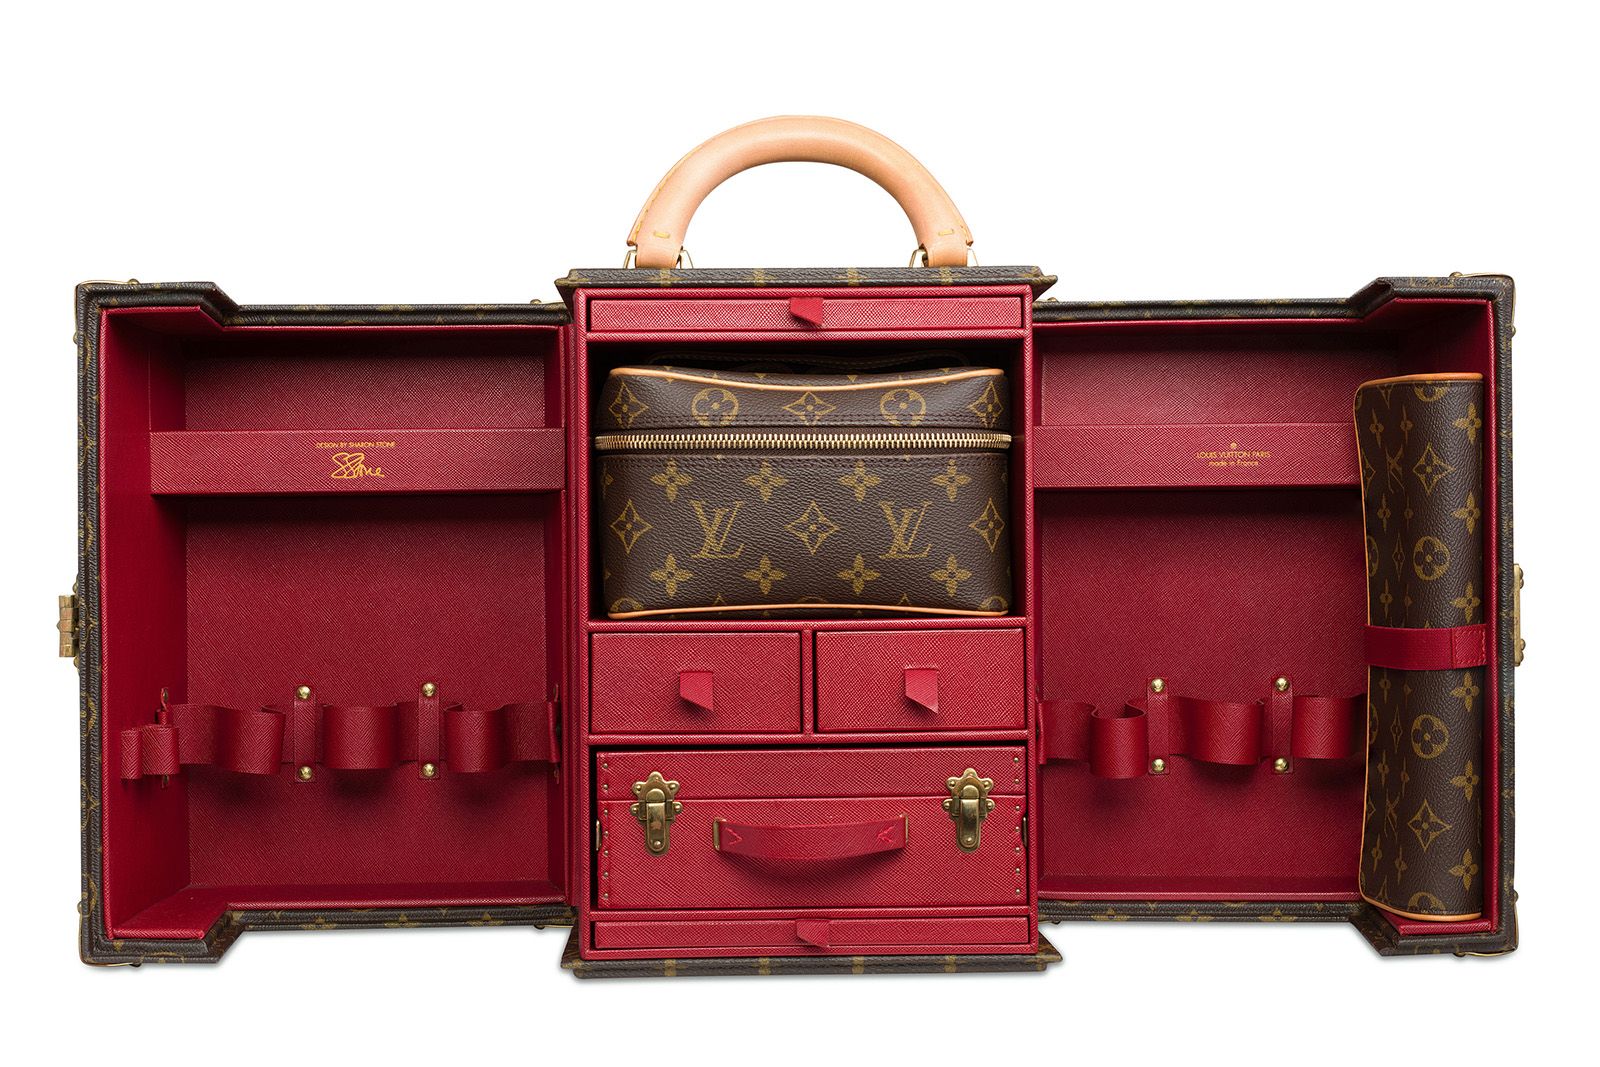 8 Most Expensive/ Priced Louis Vuitton Items List, Expensive Items, SuccessStory